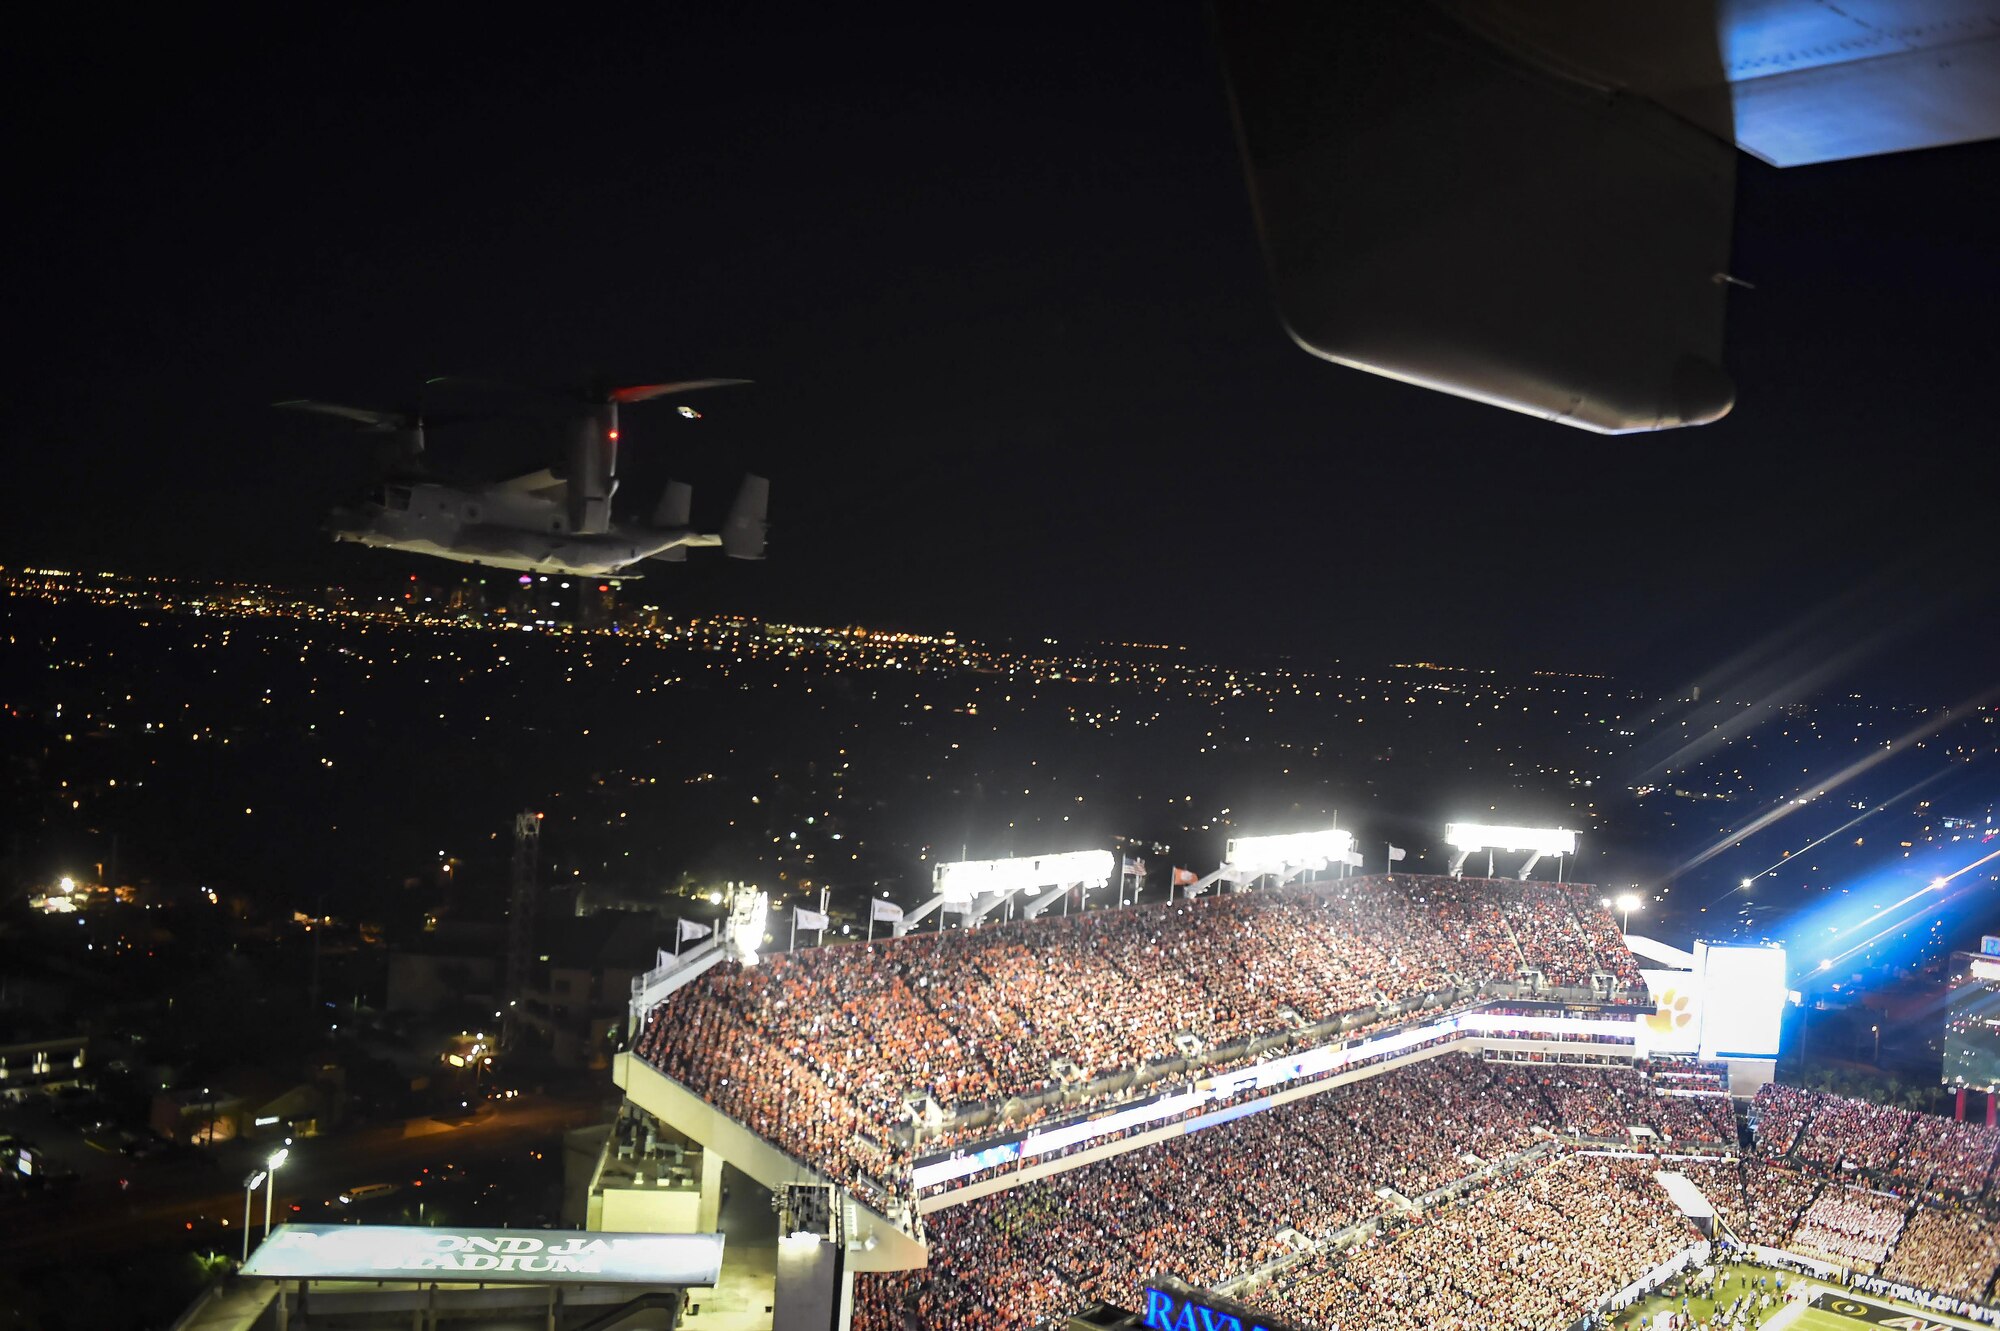 A CV-22 Osprey tiltrotor aircraft assigned to the 1st Special Operations Wing performs a flyover during the 2017 College Football Playoff National Championship game at Raymond James Stadium in Tampa, Fla., Jan. 9, 2017. The flyover was performed by two Ospreys and occurred during the playing of the National Anthem. (U.S. Air Force photo by Staff Sgt. Christopher Callaway)